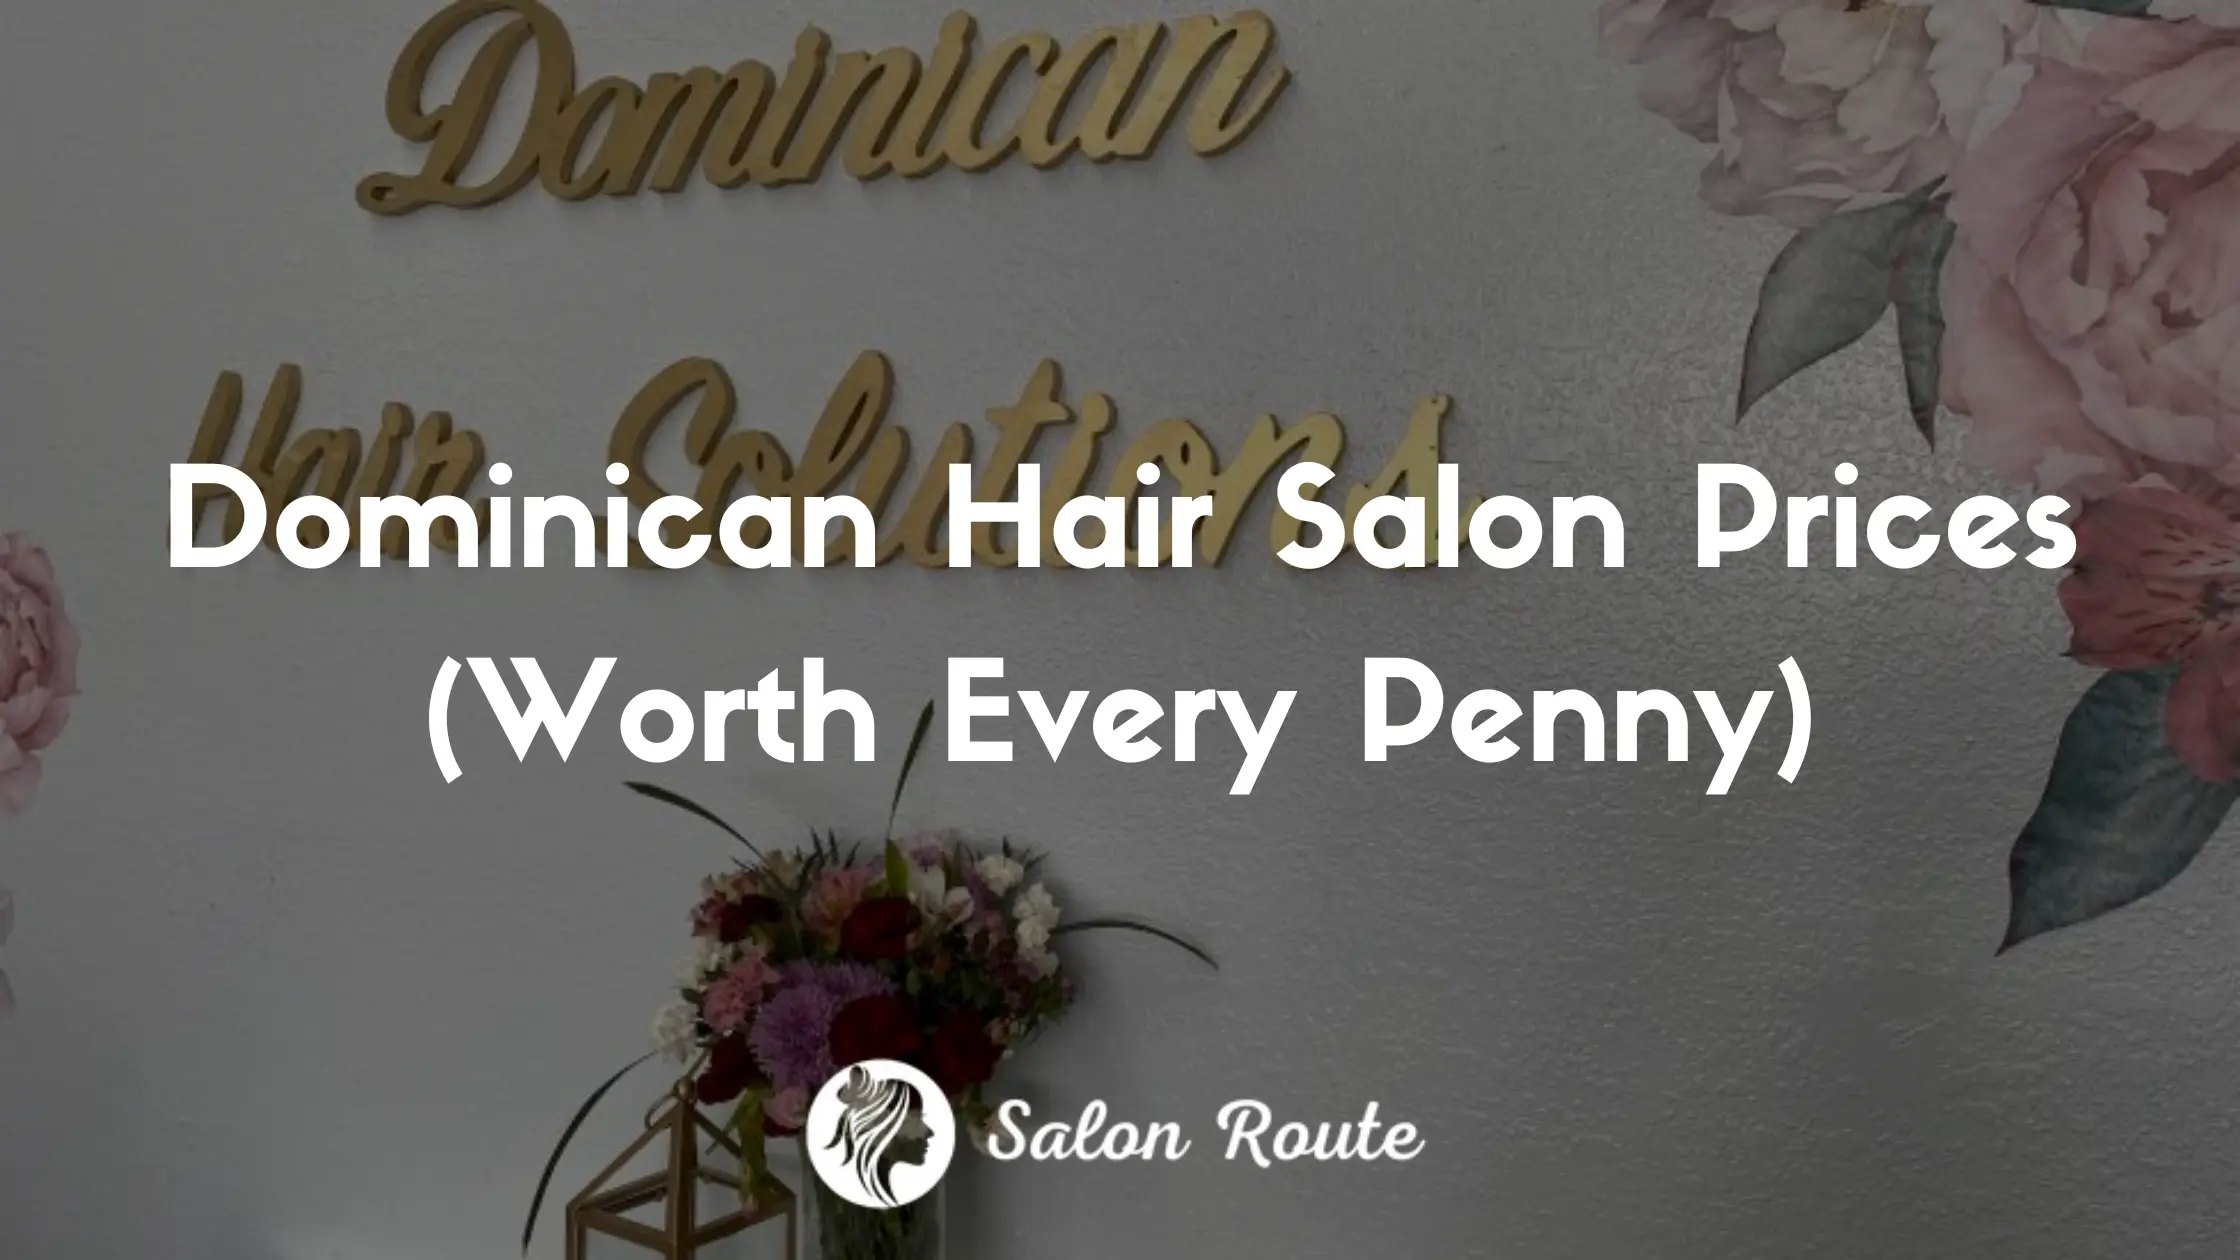 Dominican Hair Salon Prices (Worth Every Penny)